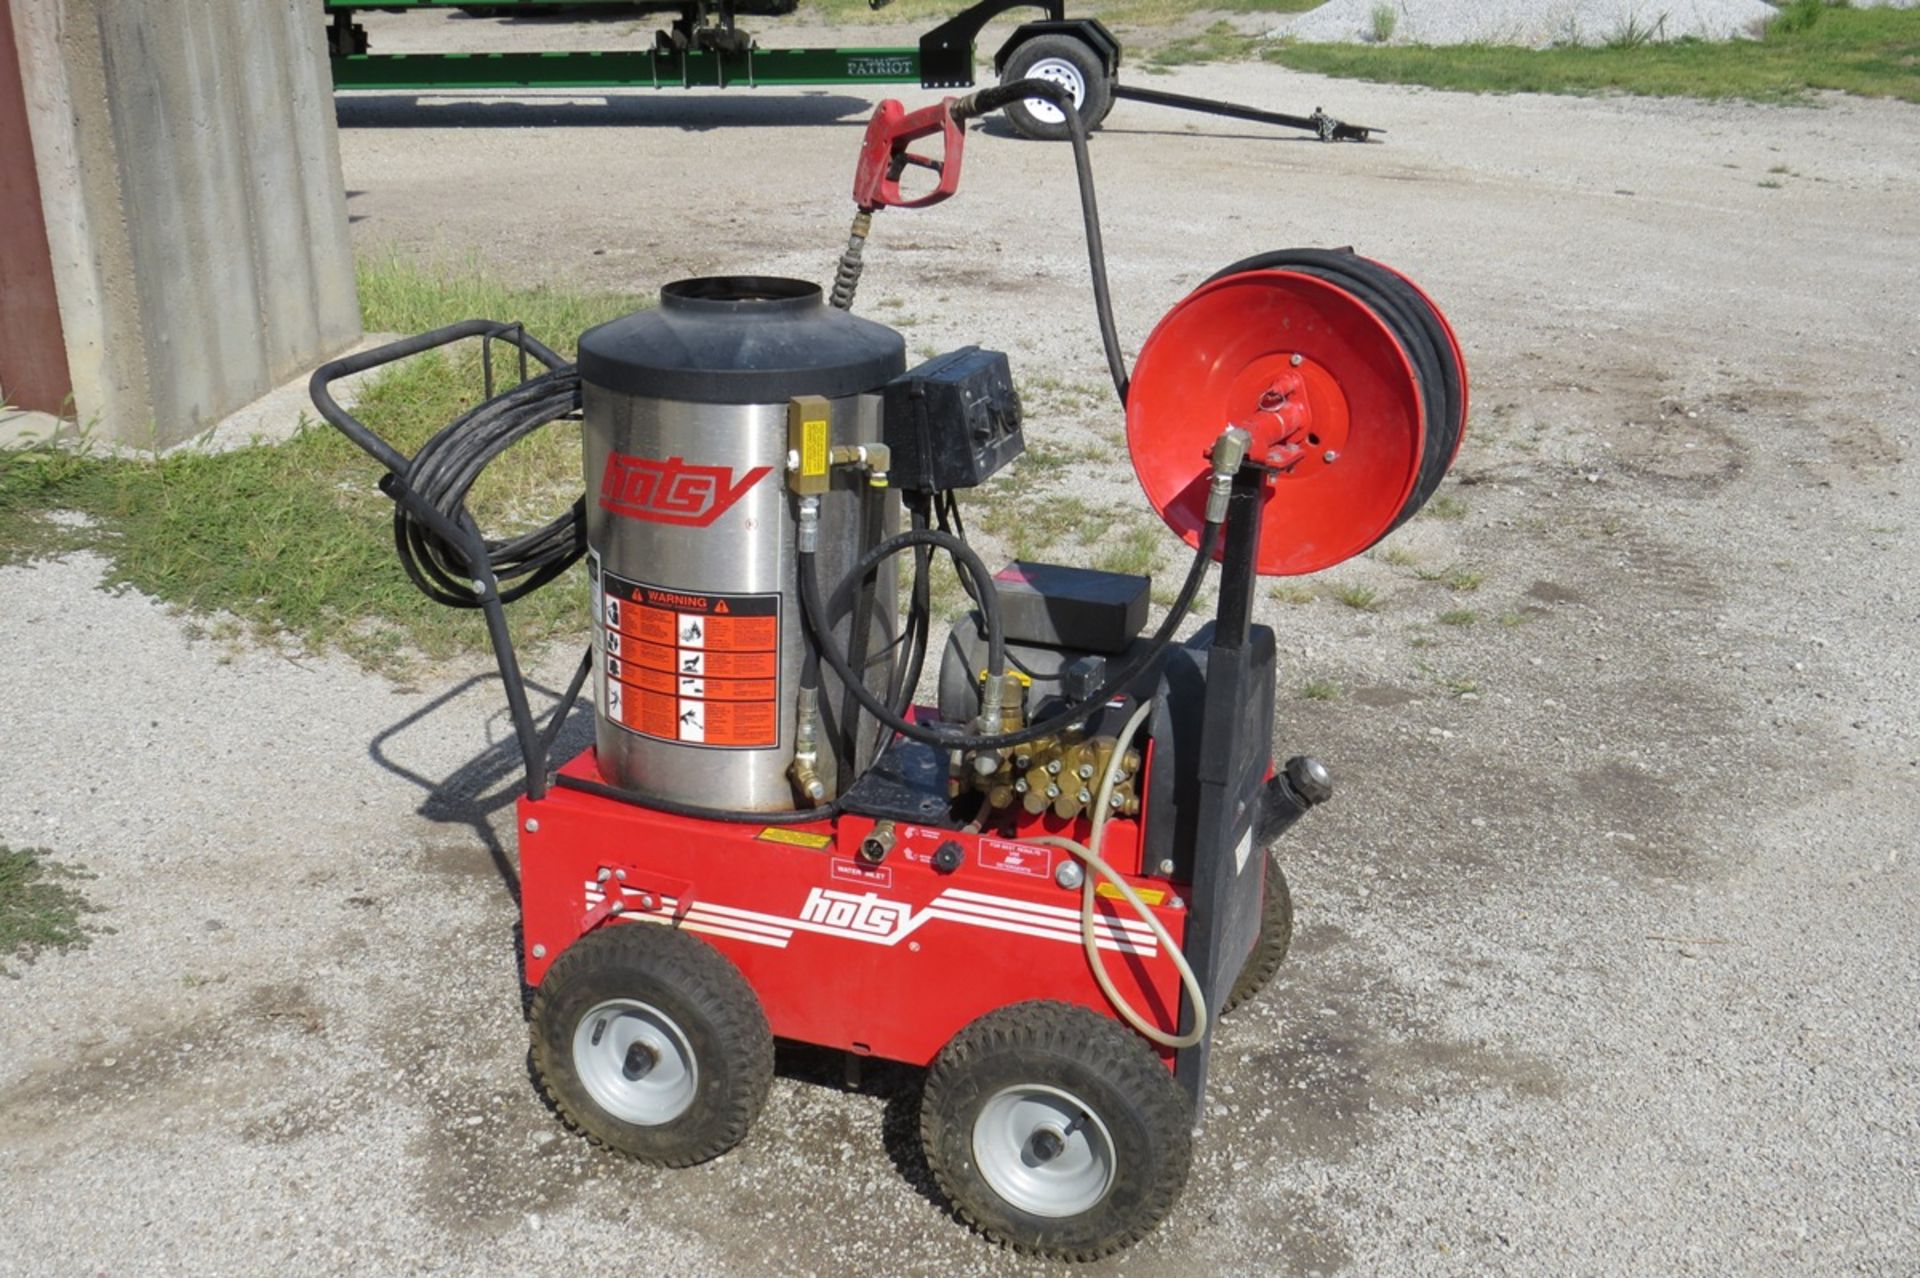 Hotsy Model 795SS SS Portable Hot Water Pressure Washer, SN# 11090390-163836, 2000 PSI, 3.5 Gallon/ - Image 3 of 5